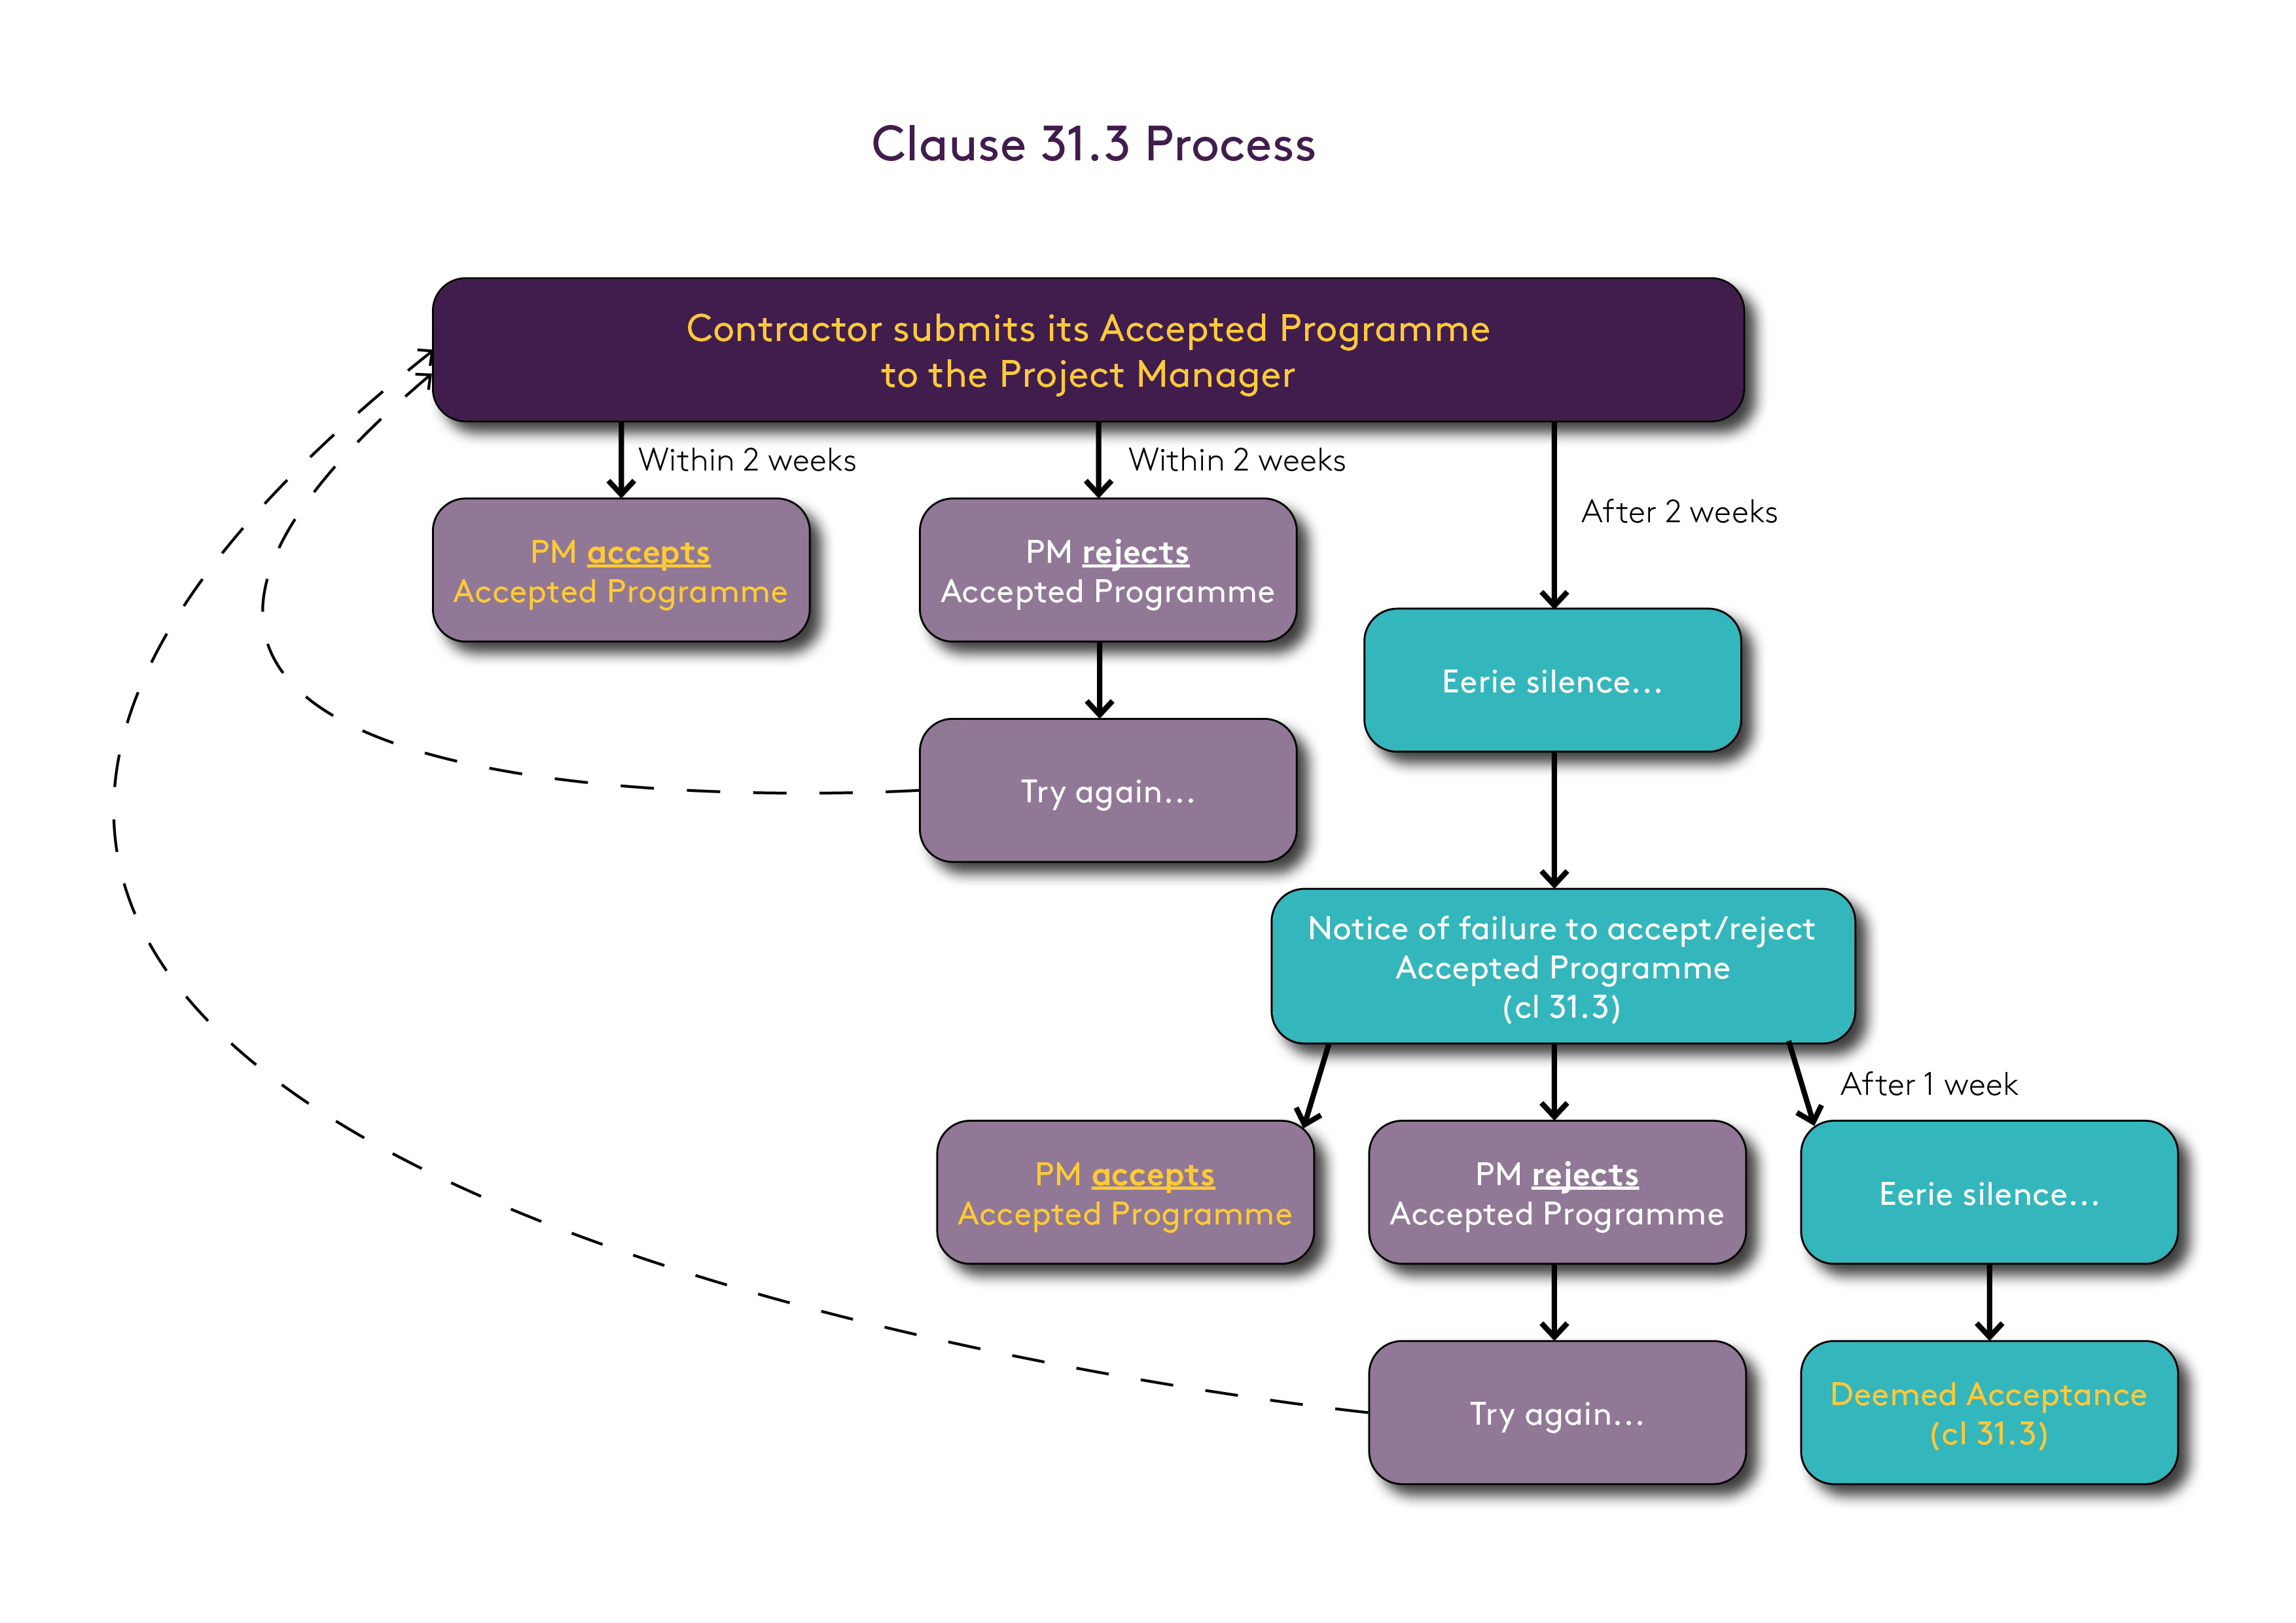 Figure 4 – Clause 31.3 Process – The Accepted Programme